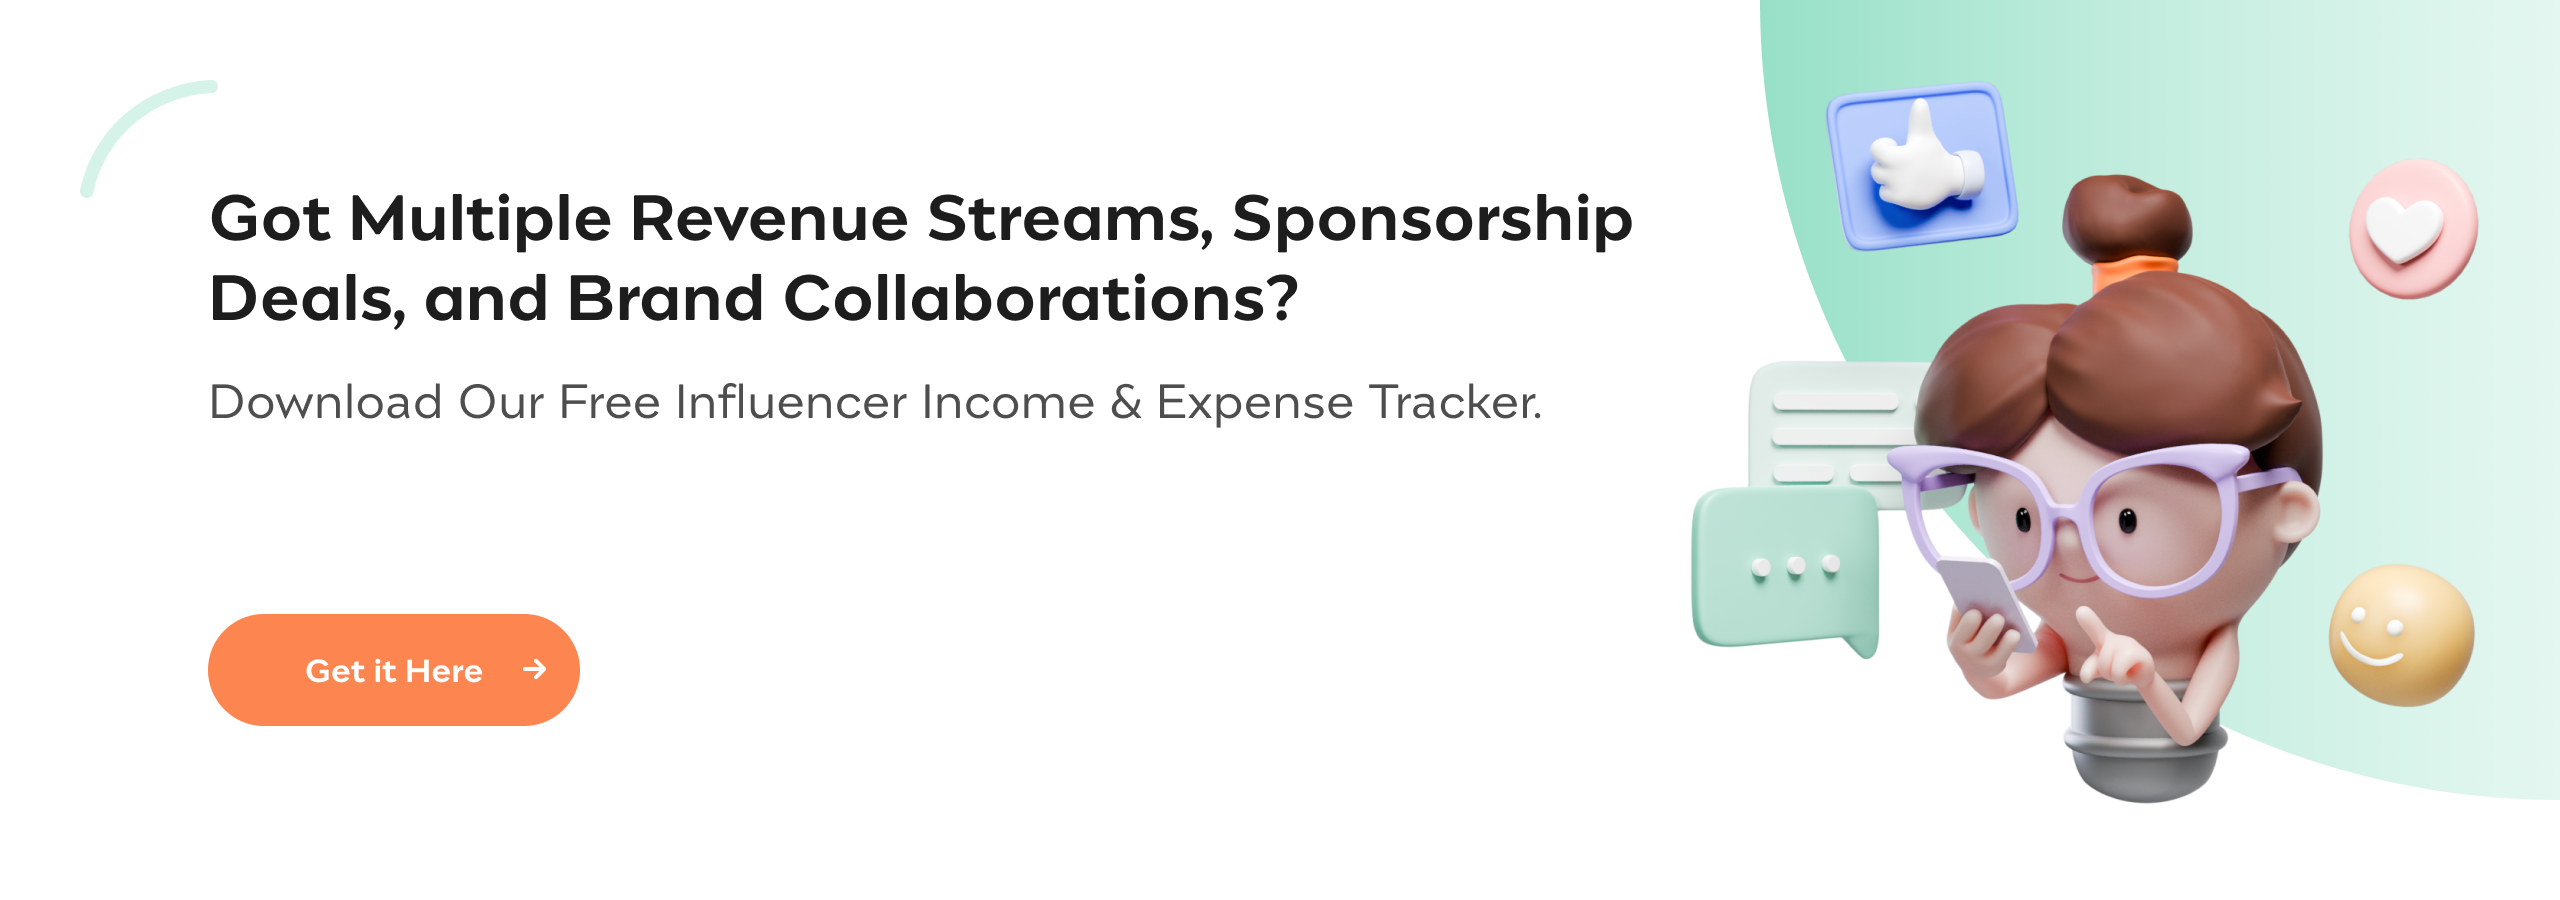 Got Multiple Revenue Streams, Sponsorship Deals, and Brand Collaborations? Download Our Free Influencer Income & Expense Tracker.